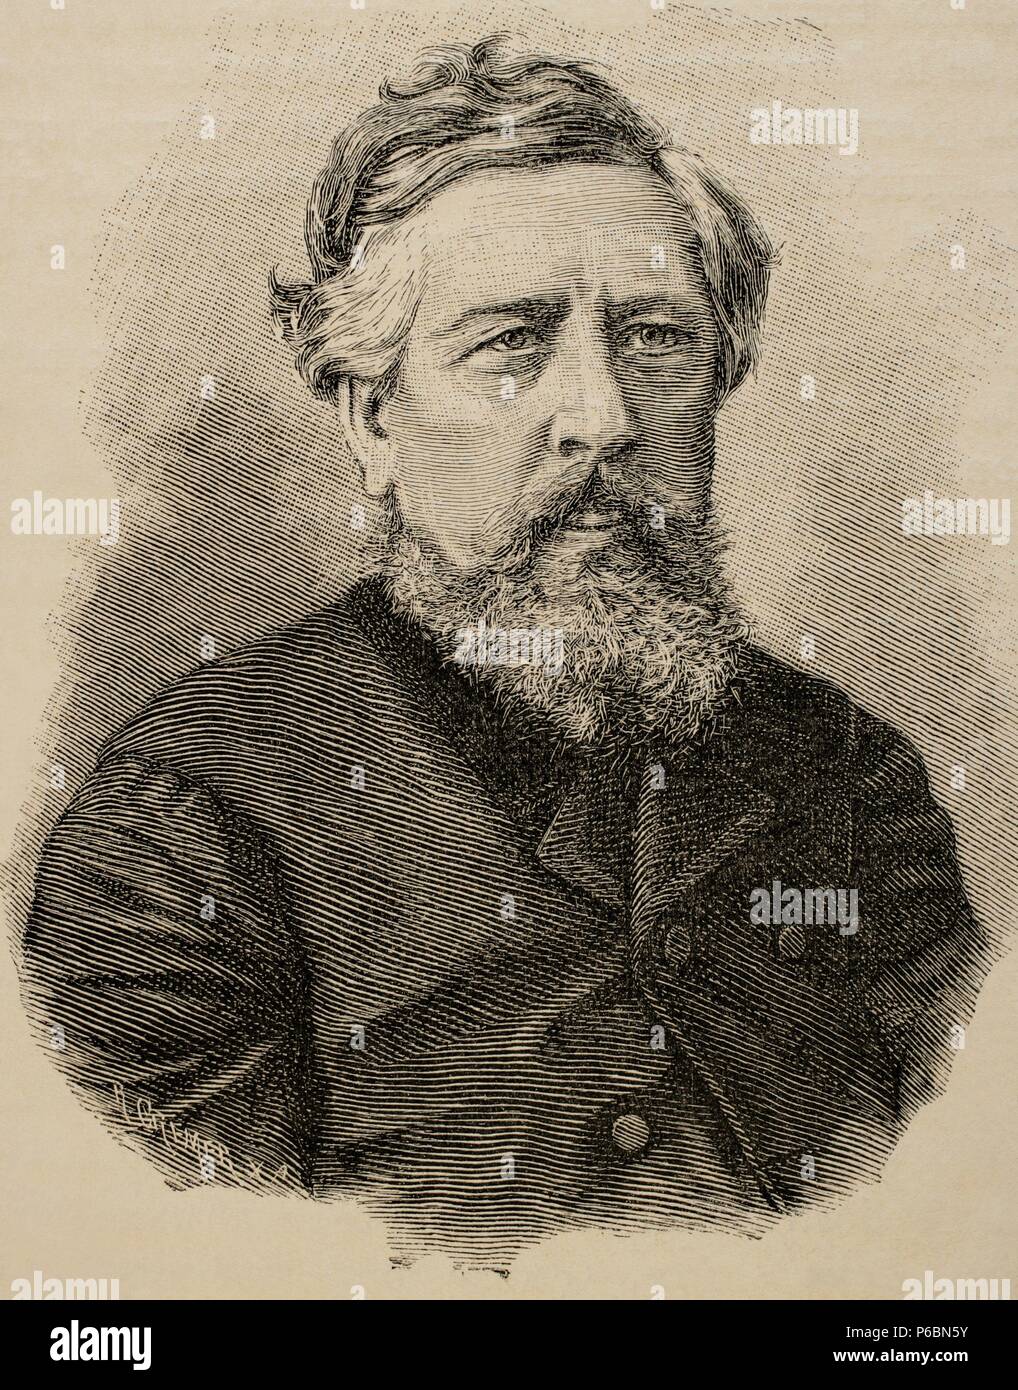 Wilhelm Liebknecht( 1826-1900). German social democrat and one of the principal founders of the SPD. Engraving by 'Universal History', 1885. Stock Photo